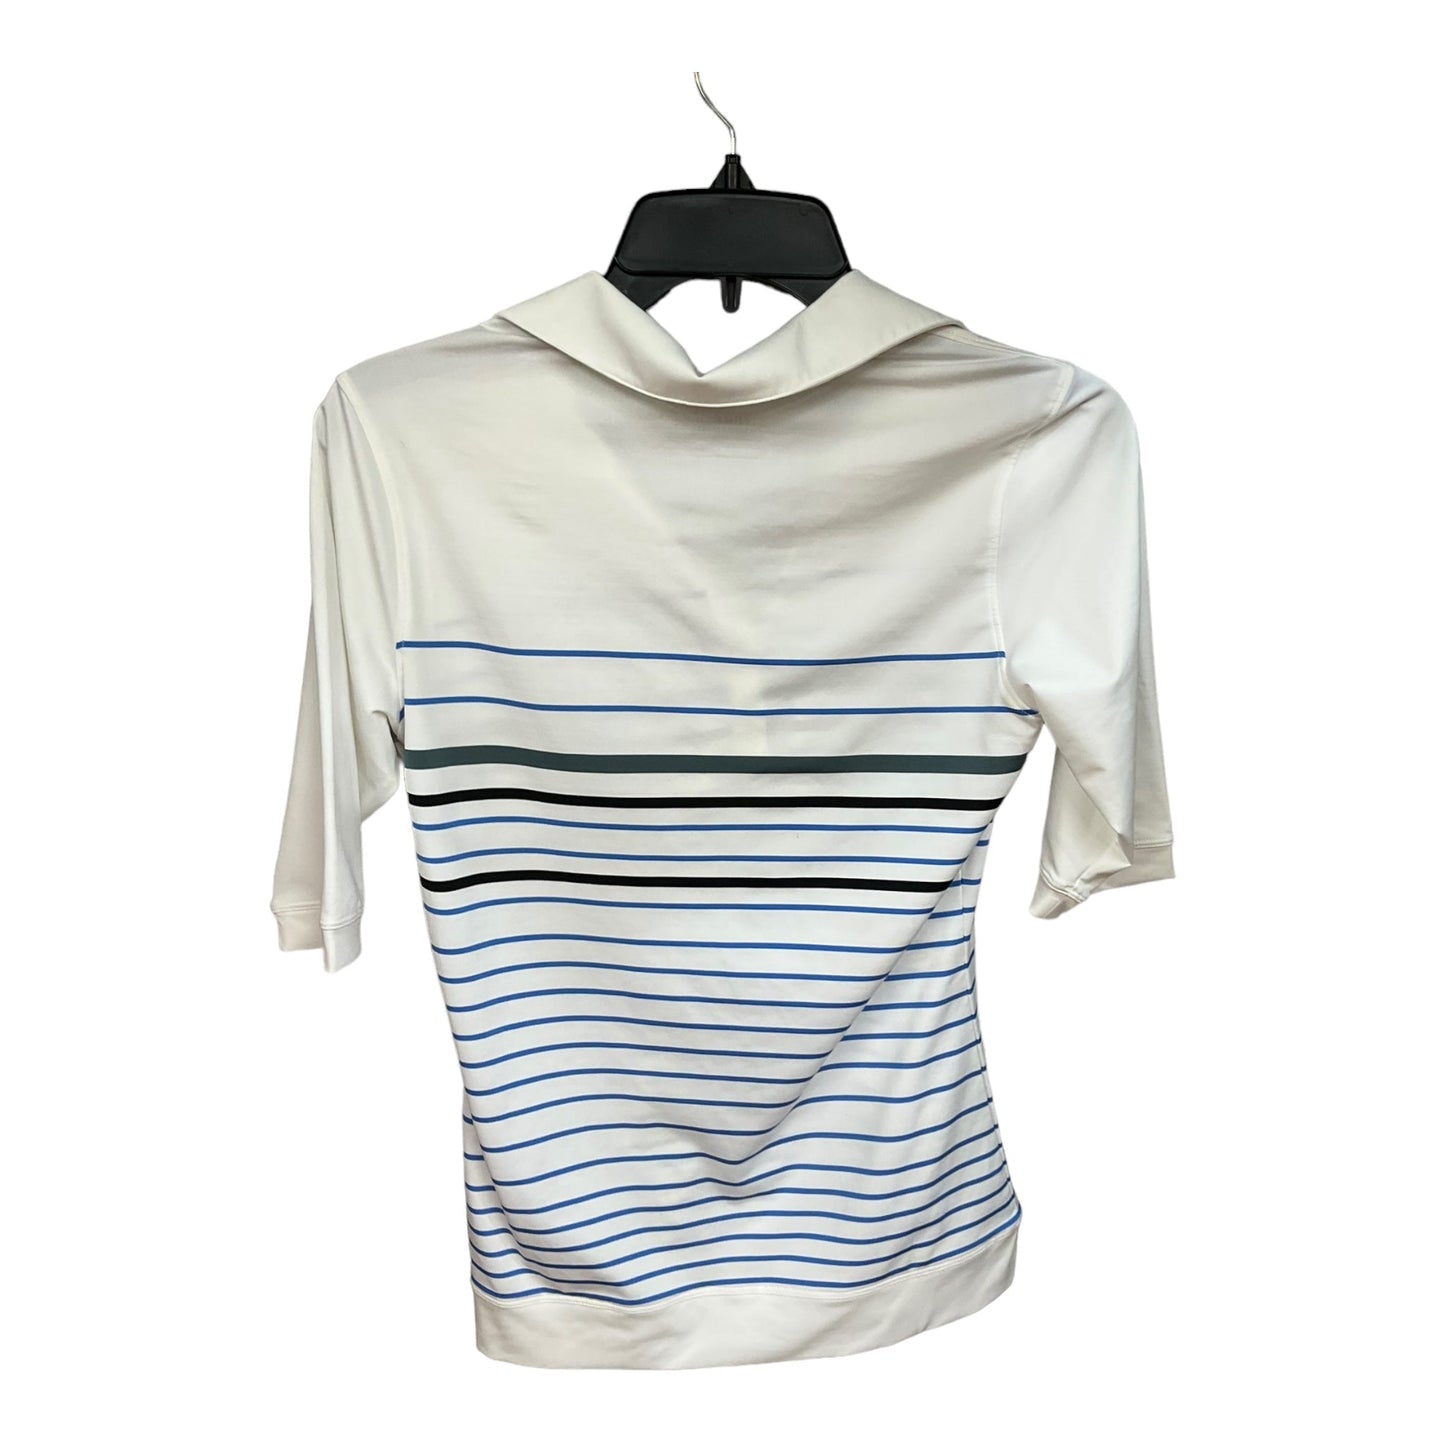 Striped Athletic Top Short Sleeve Nike Apparel, Size Xs